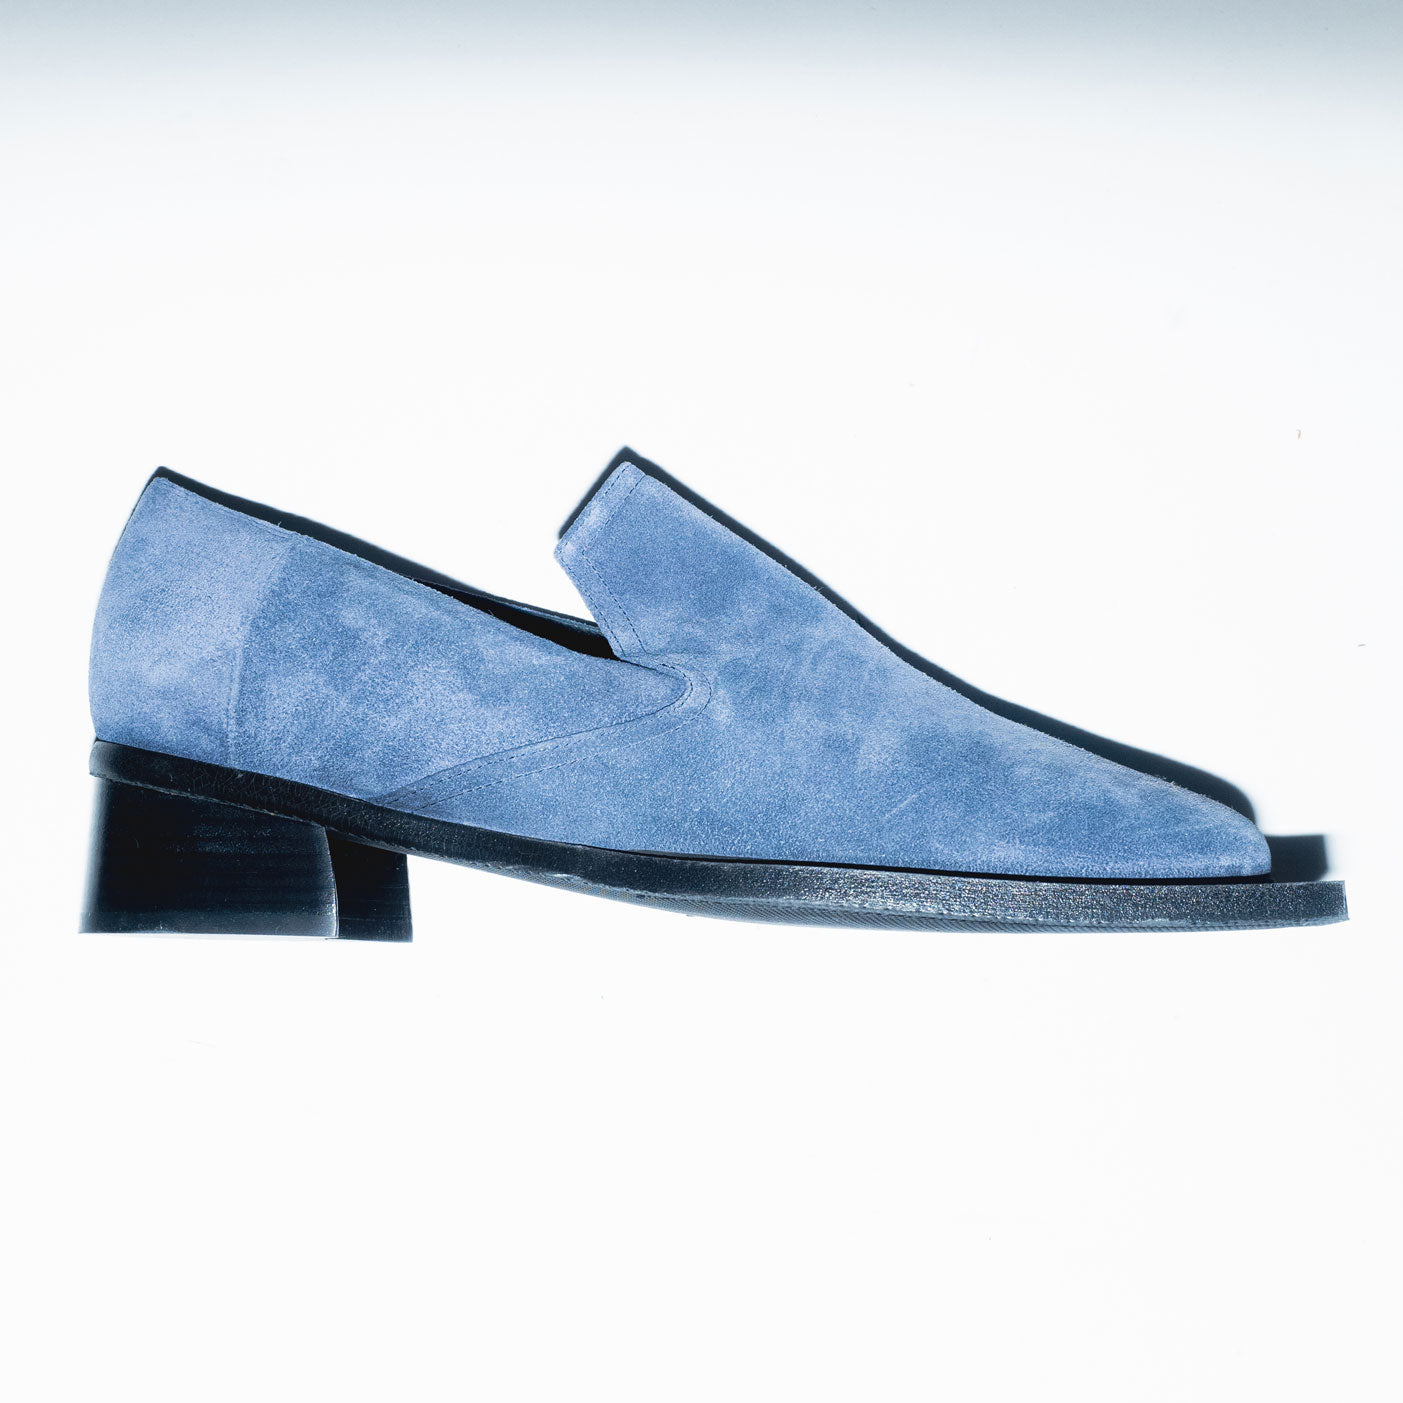 Archive Howled Loafers in Office Blue Suede Leather